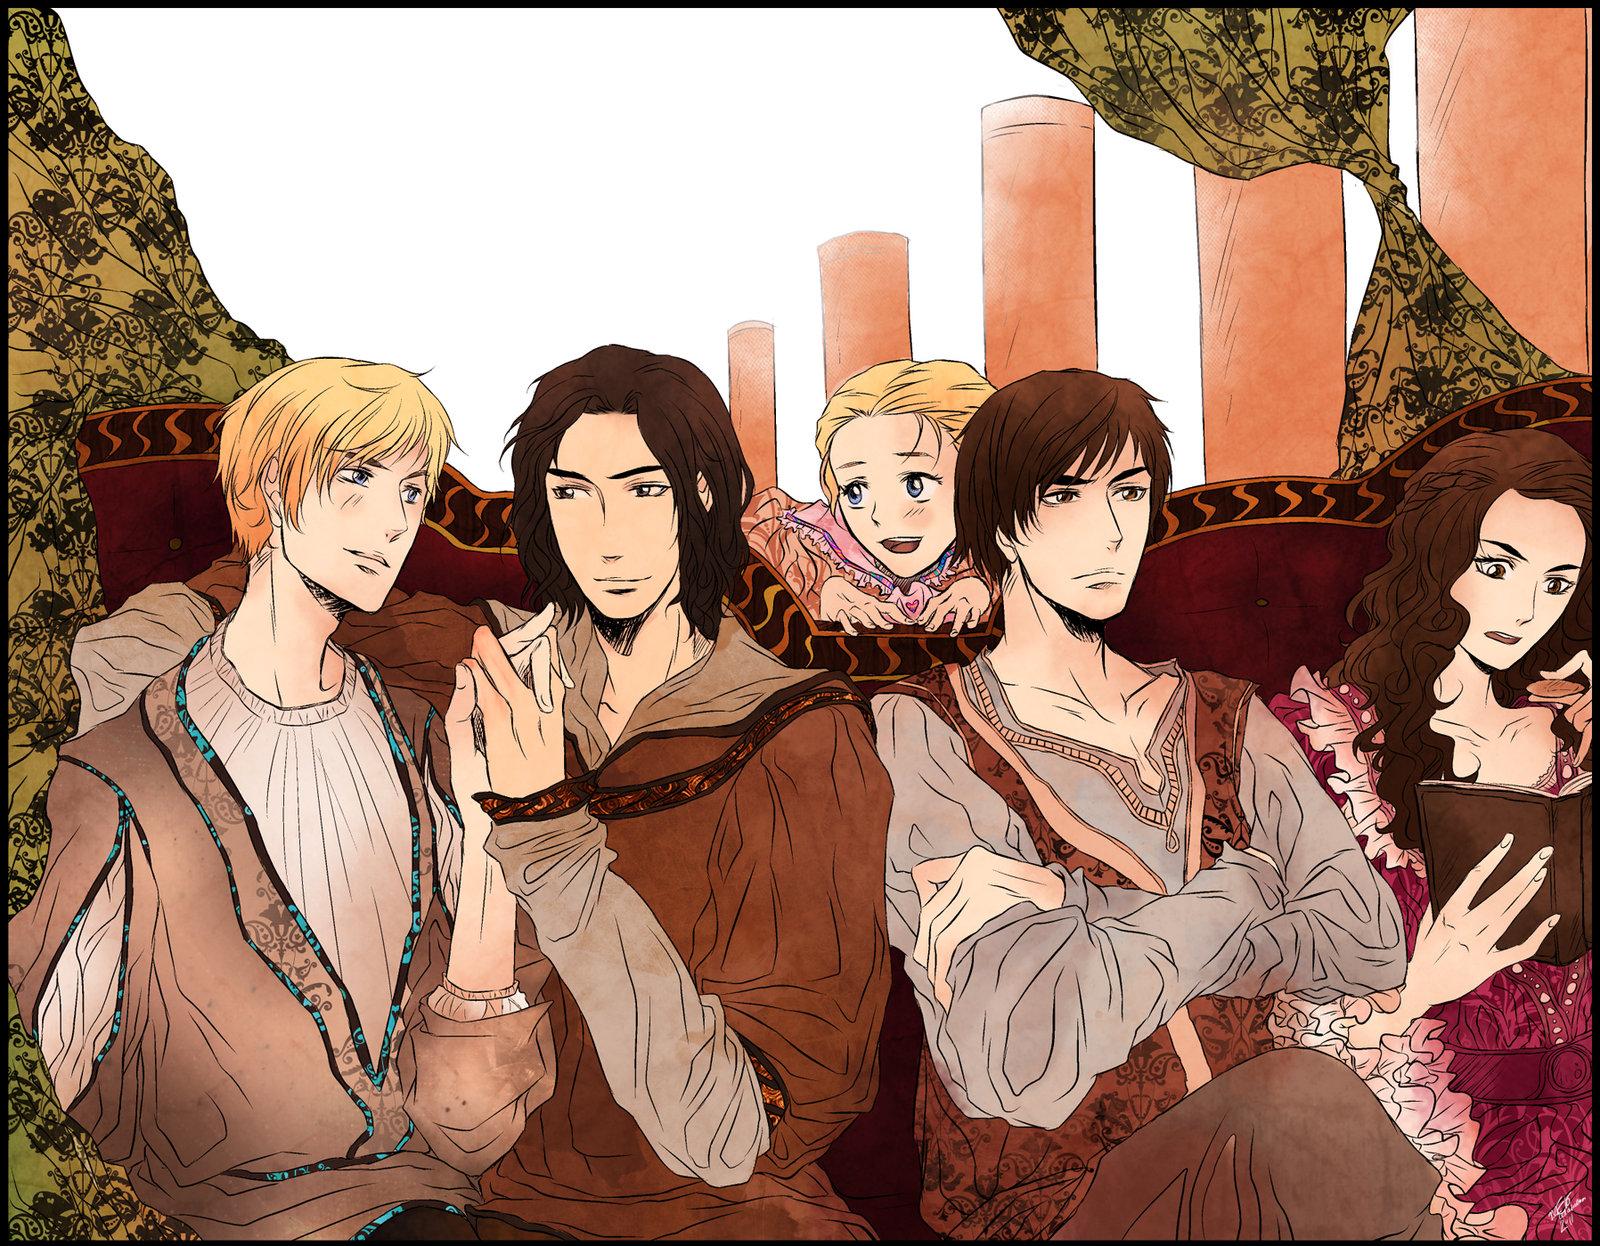 The Chronicles of Narnia Anime Image Board